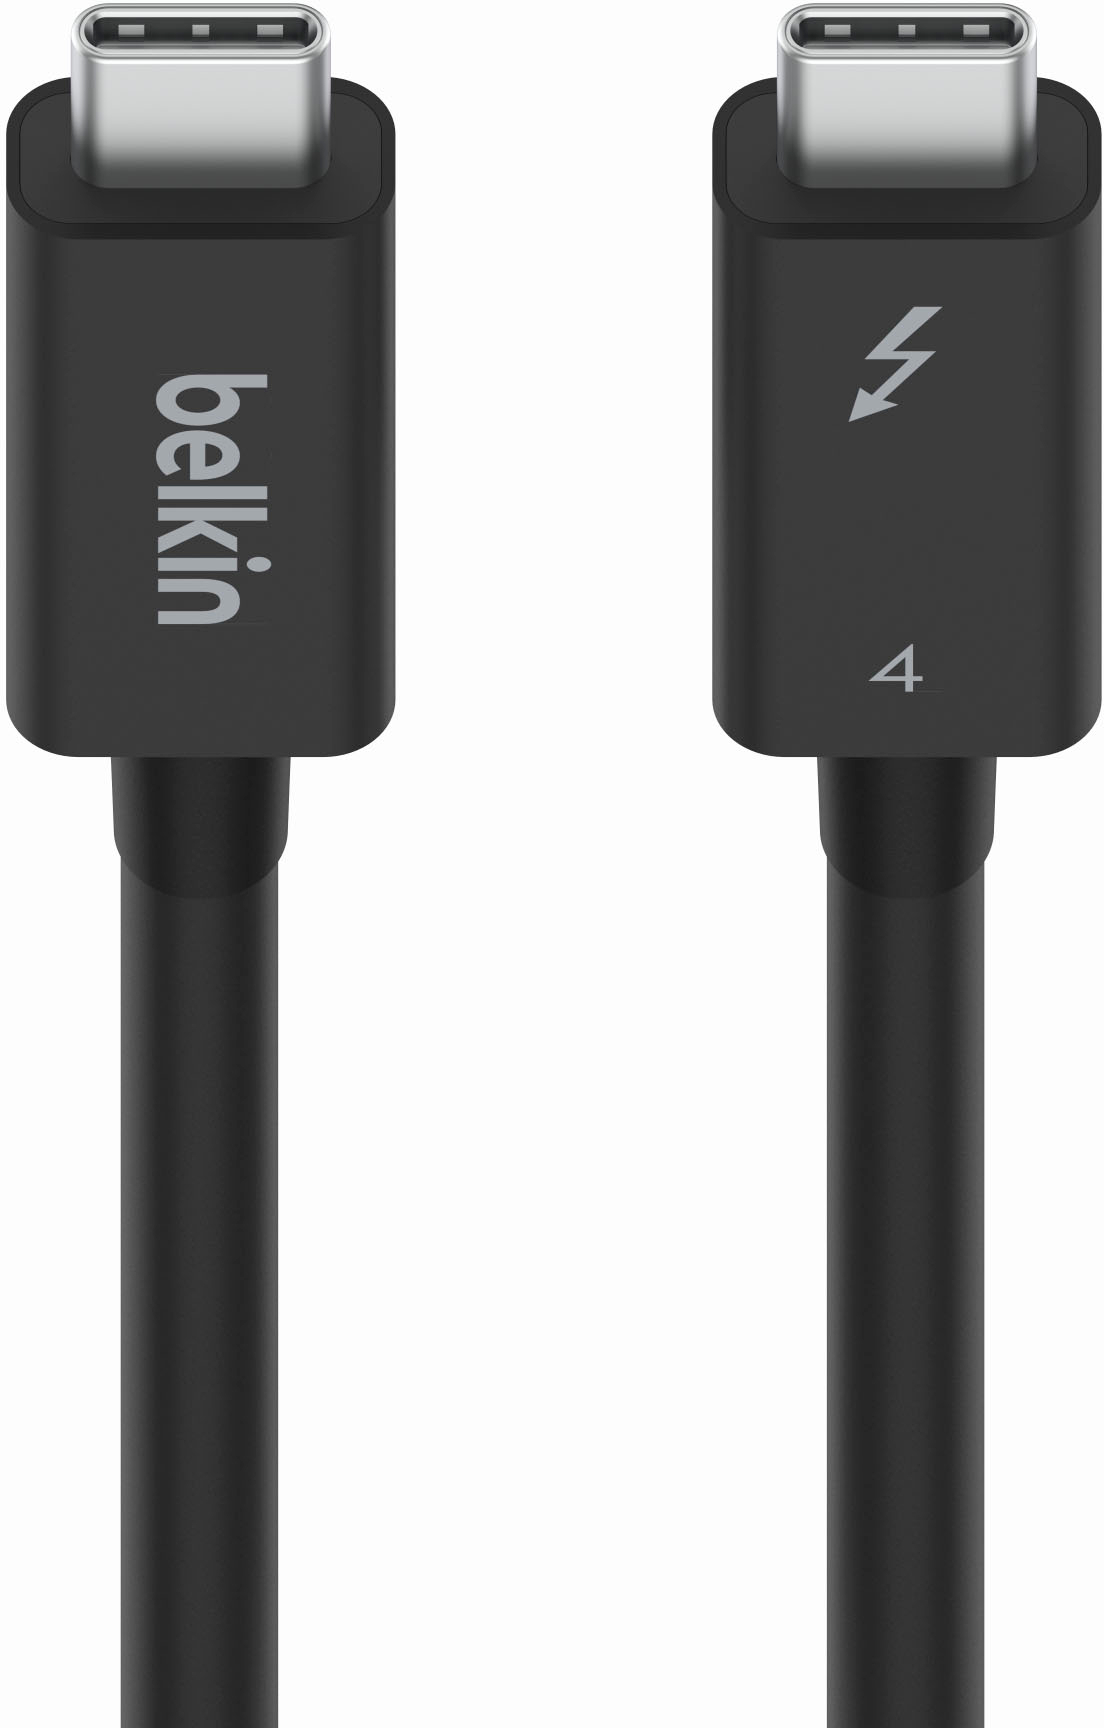 BELKIN Boost Charge 240w USB-C to USB-C Cable 2M White